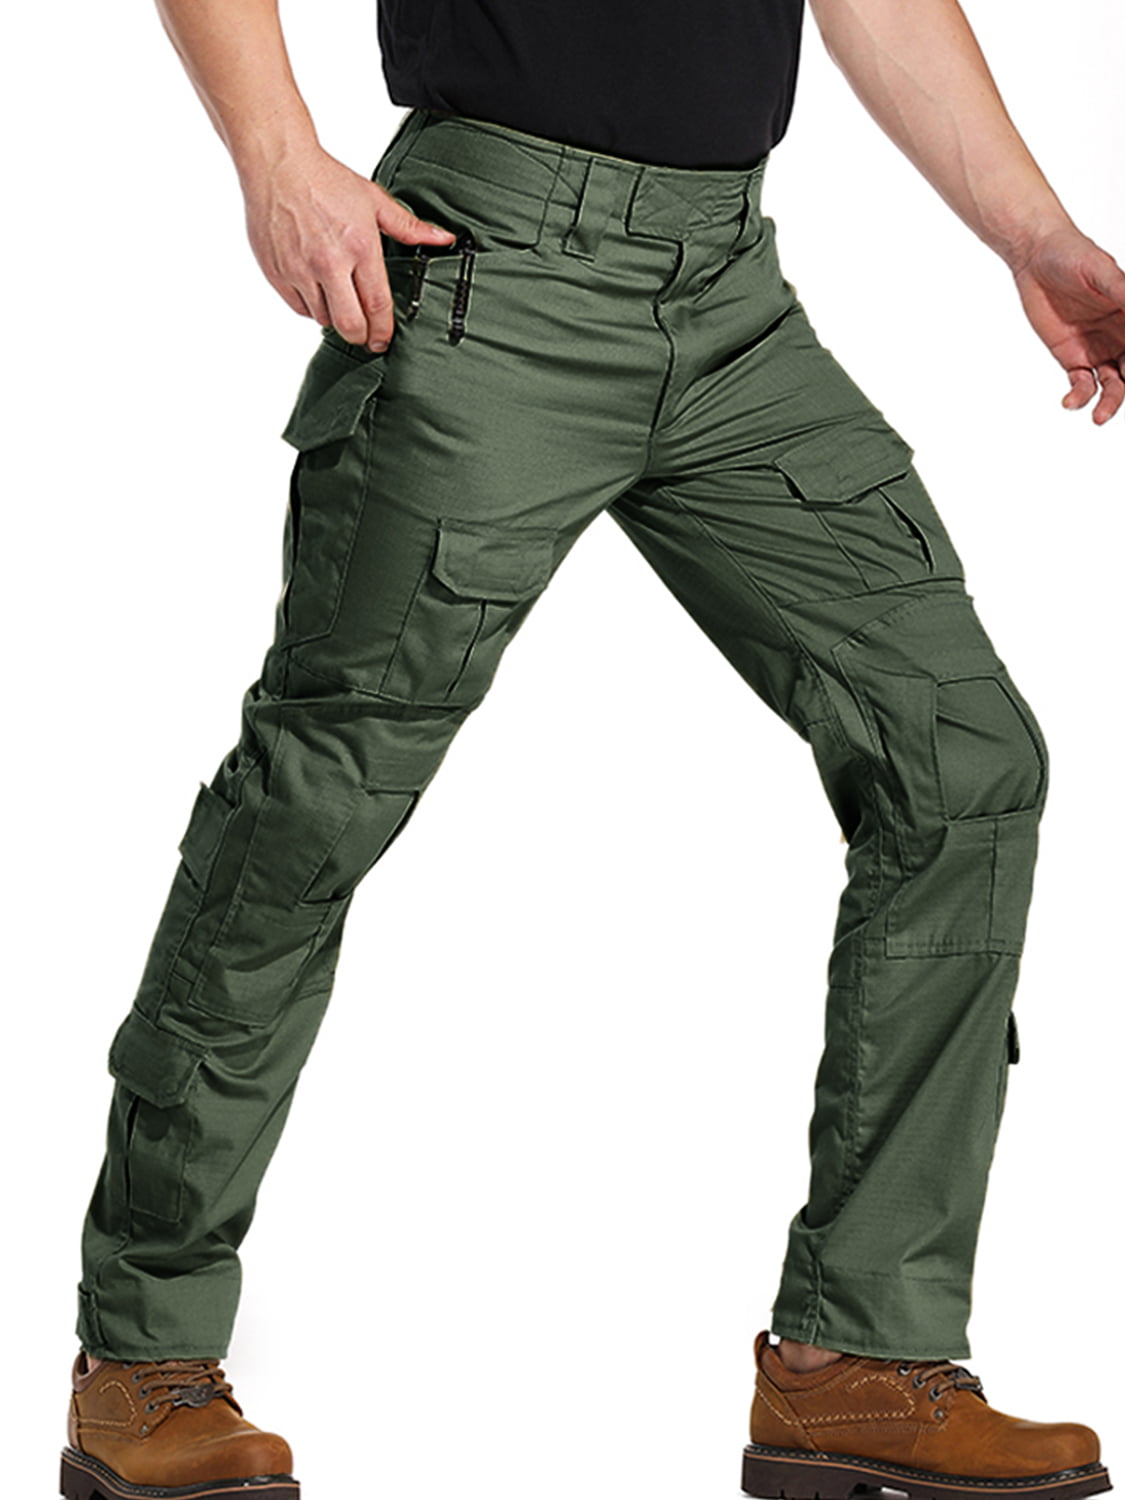 TACVASEN Men's Outdoor Quick Dry Water Repellent Assault Cargo Military Hiking Pants with 8 Pockets 